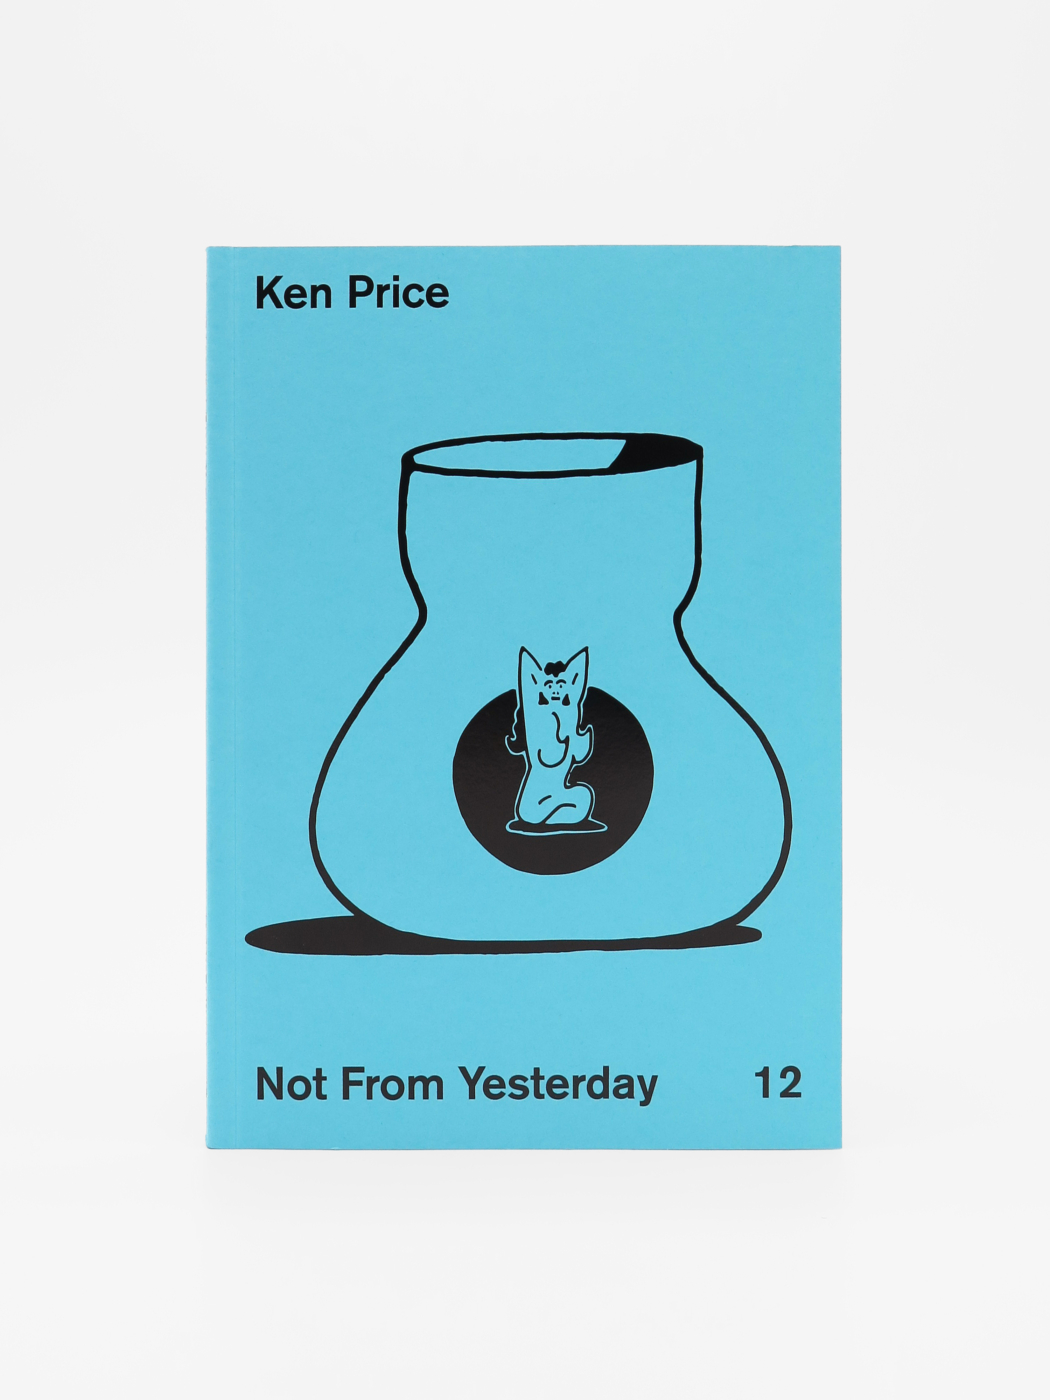 Ken Price, Not From Yesterday